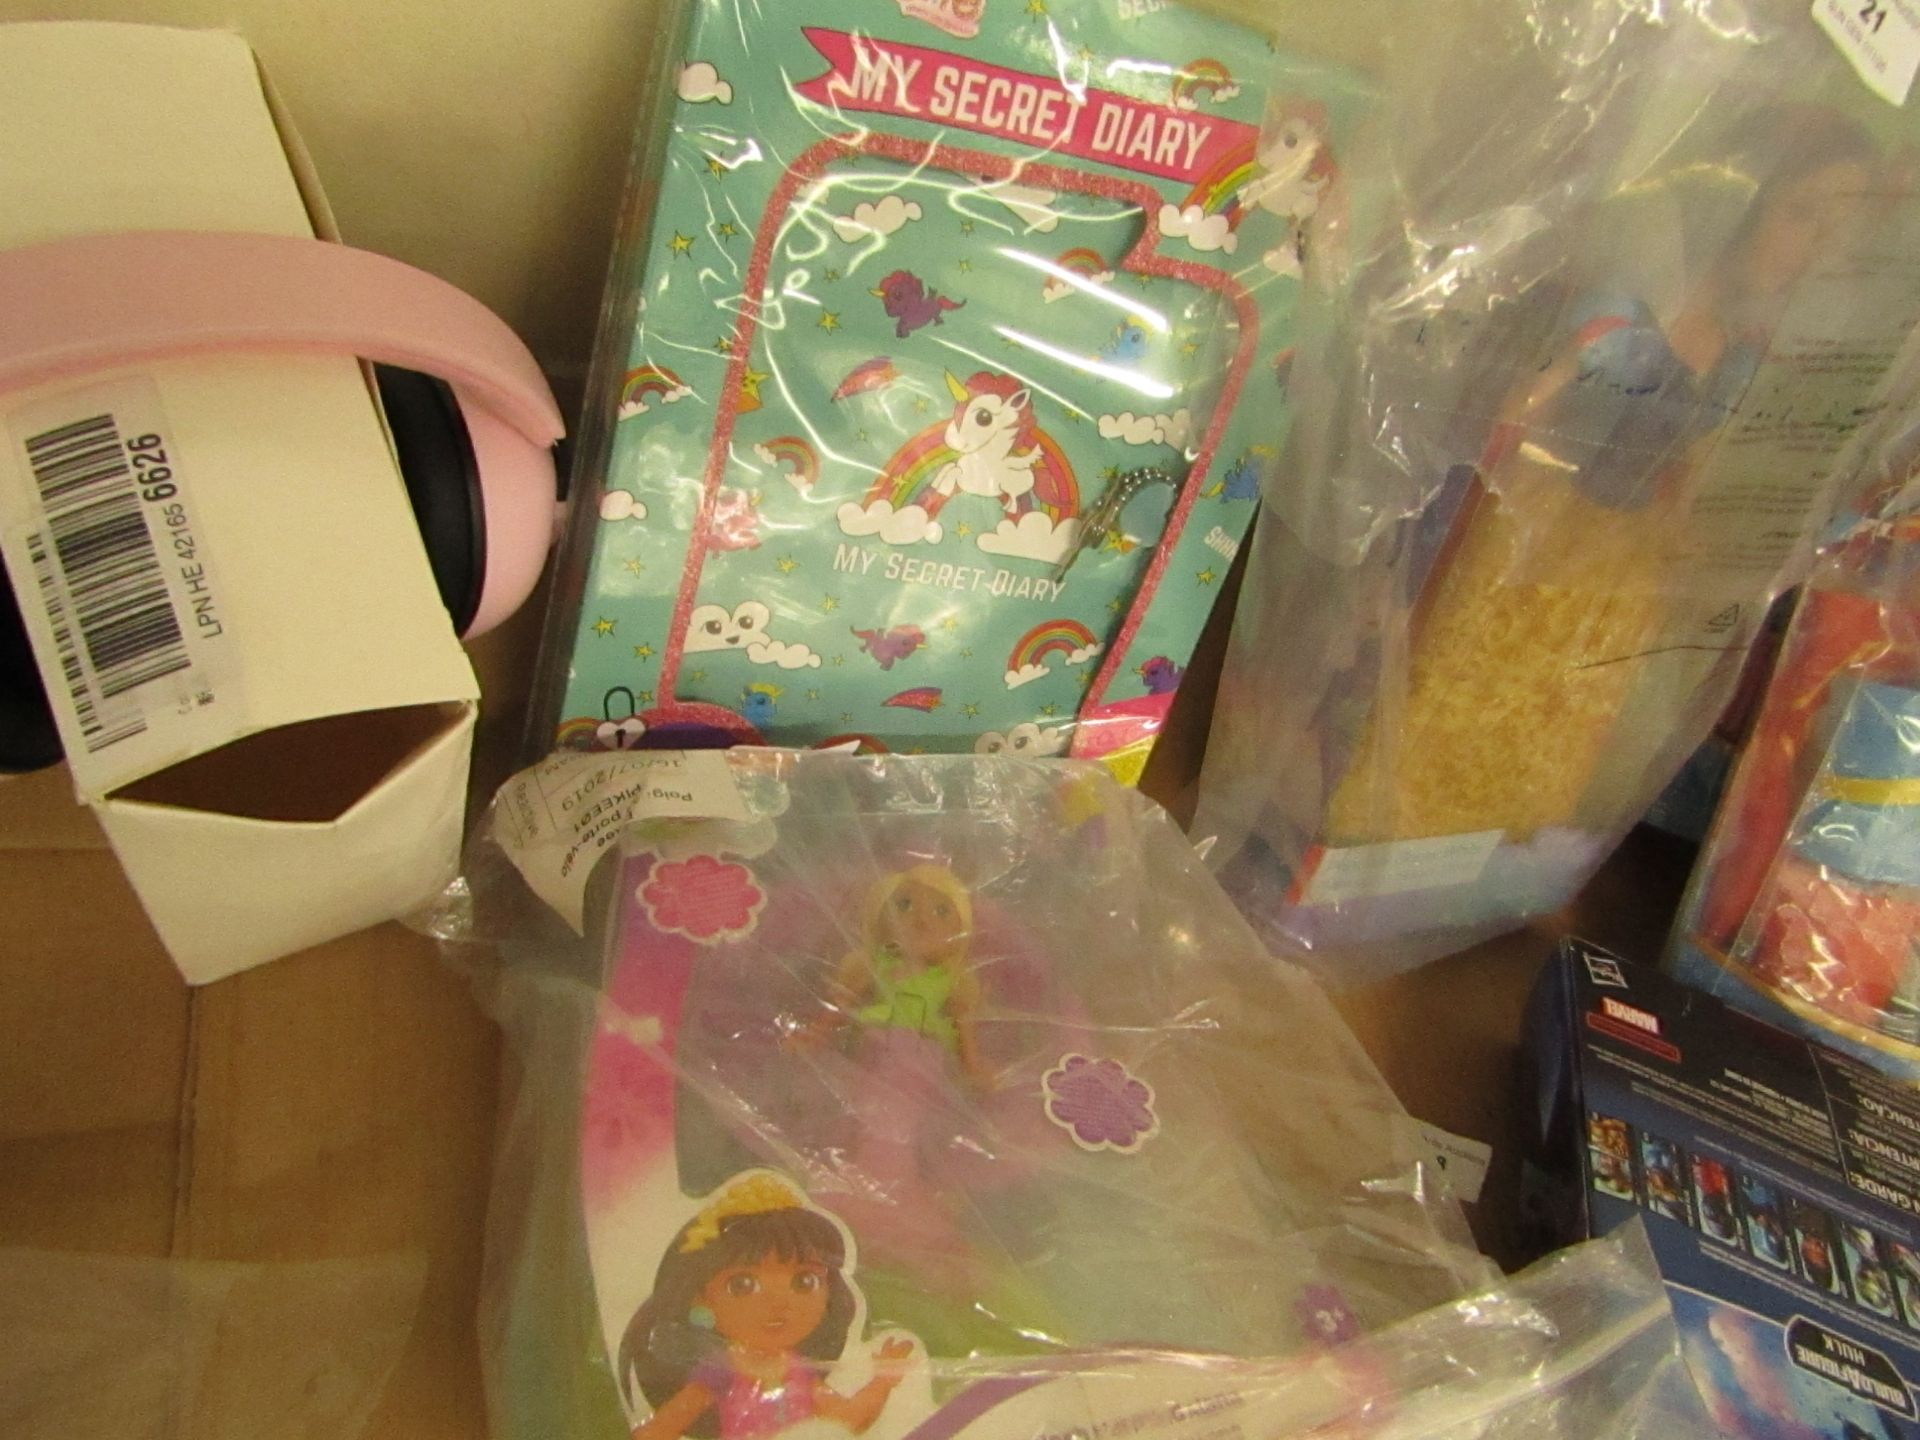 2 Items Being a Dora & Friends Figure & a Girlzone Secret Diary. Packaging damaged but products